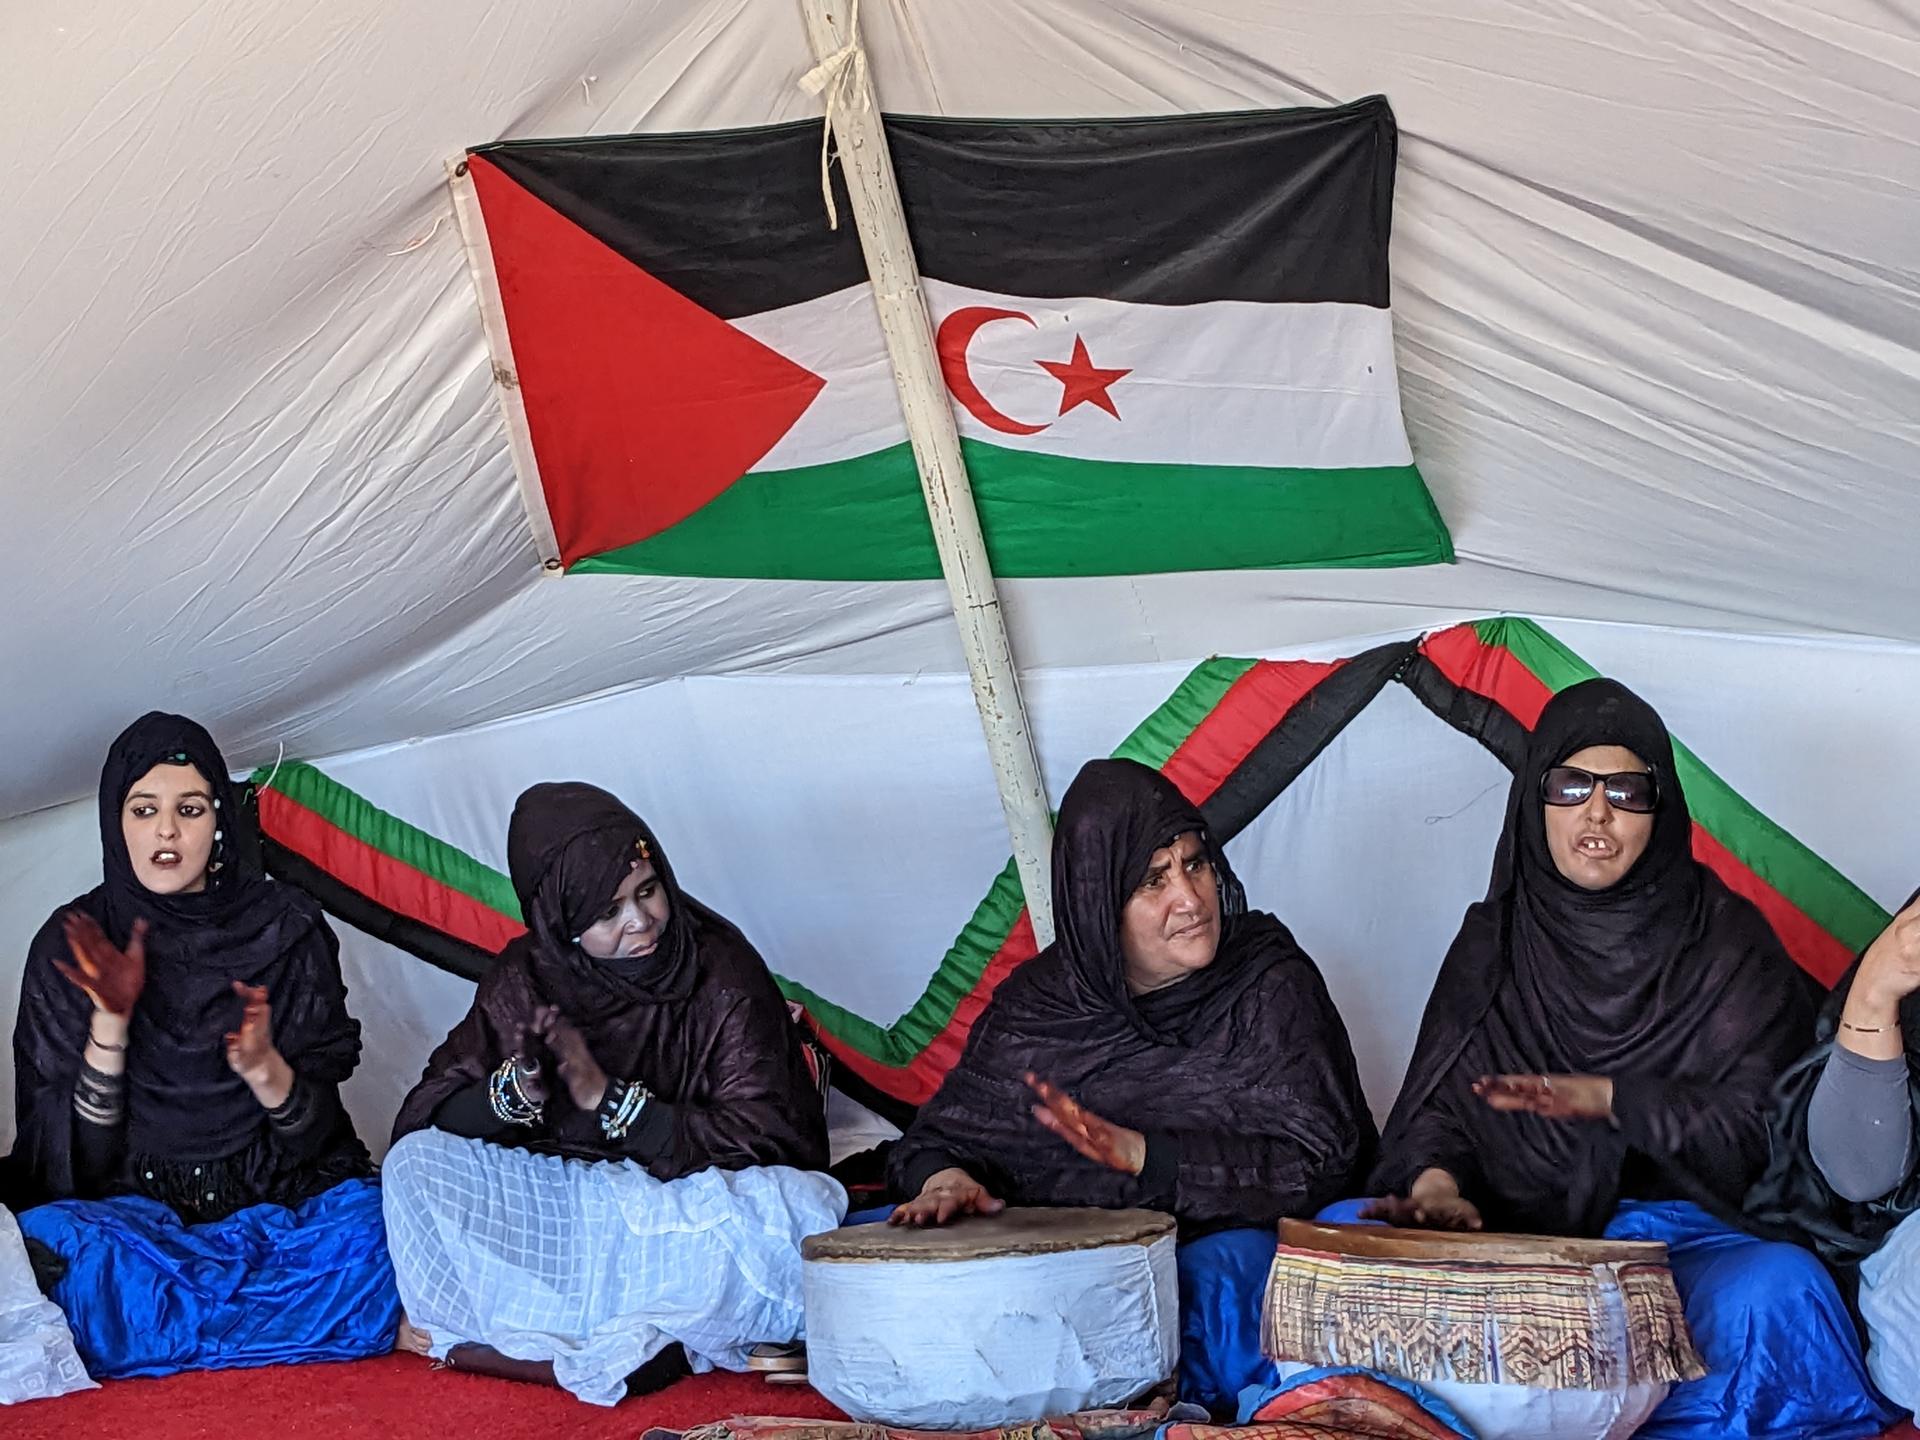 A cultural fair held in conjunction with the FiSahara film festival to showcase Sahrawi dance, music, and art, Algeria.